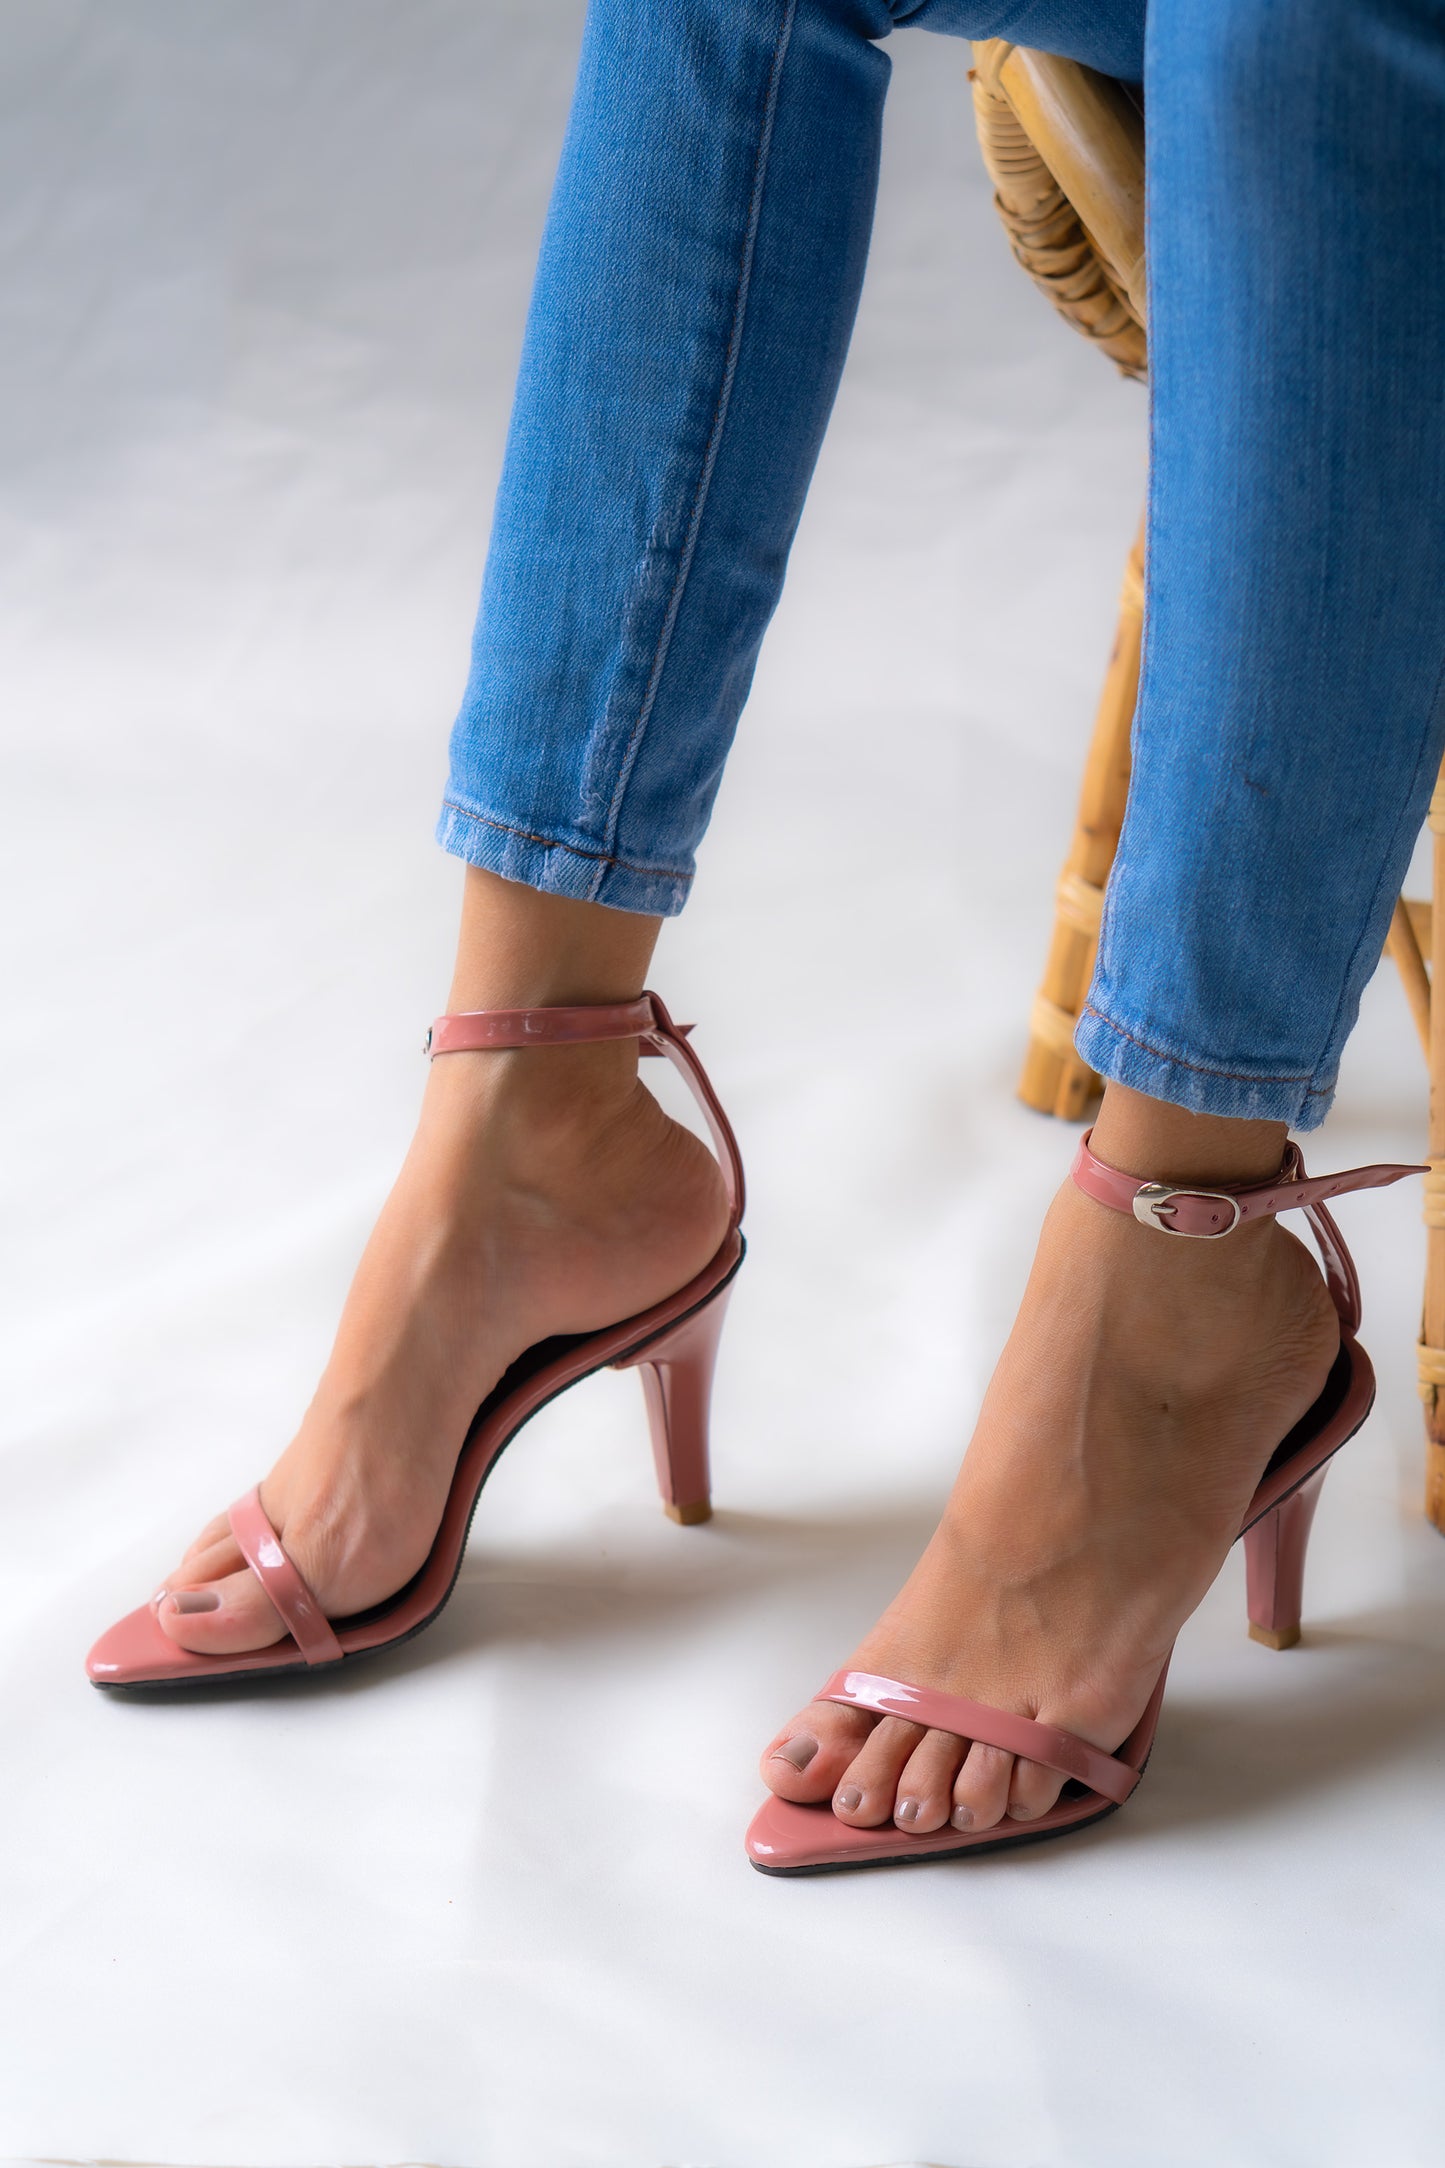 Beautiful rose pink heel elevated with a 3-inch heel